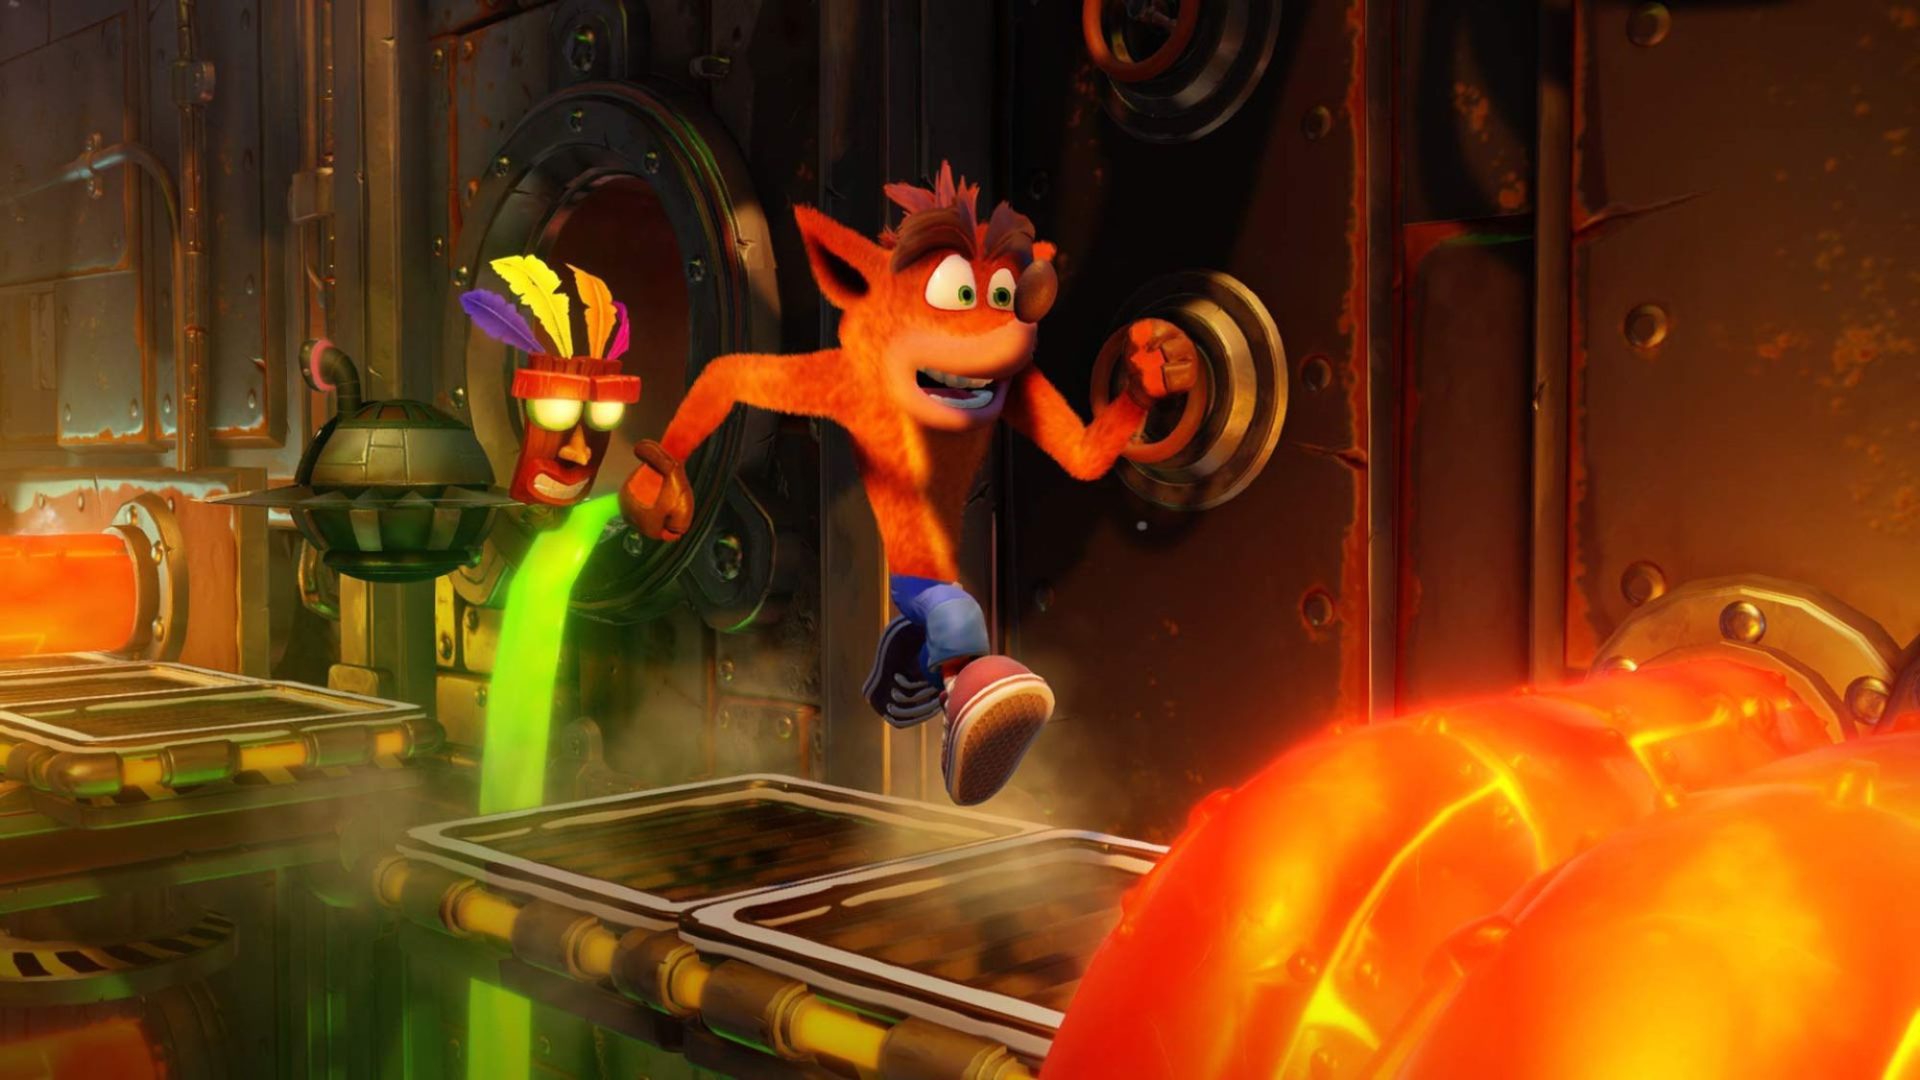 More Activision games reportedly coming to Xbox Game Pass this year, including Crash Bandicoot N. Sane Trilogy